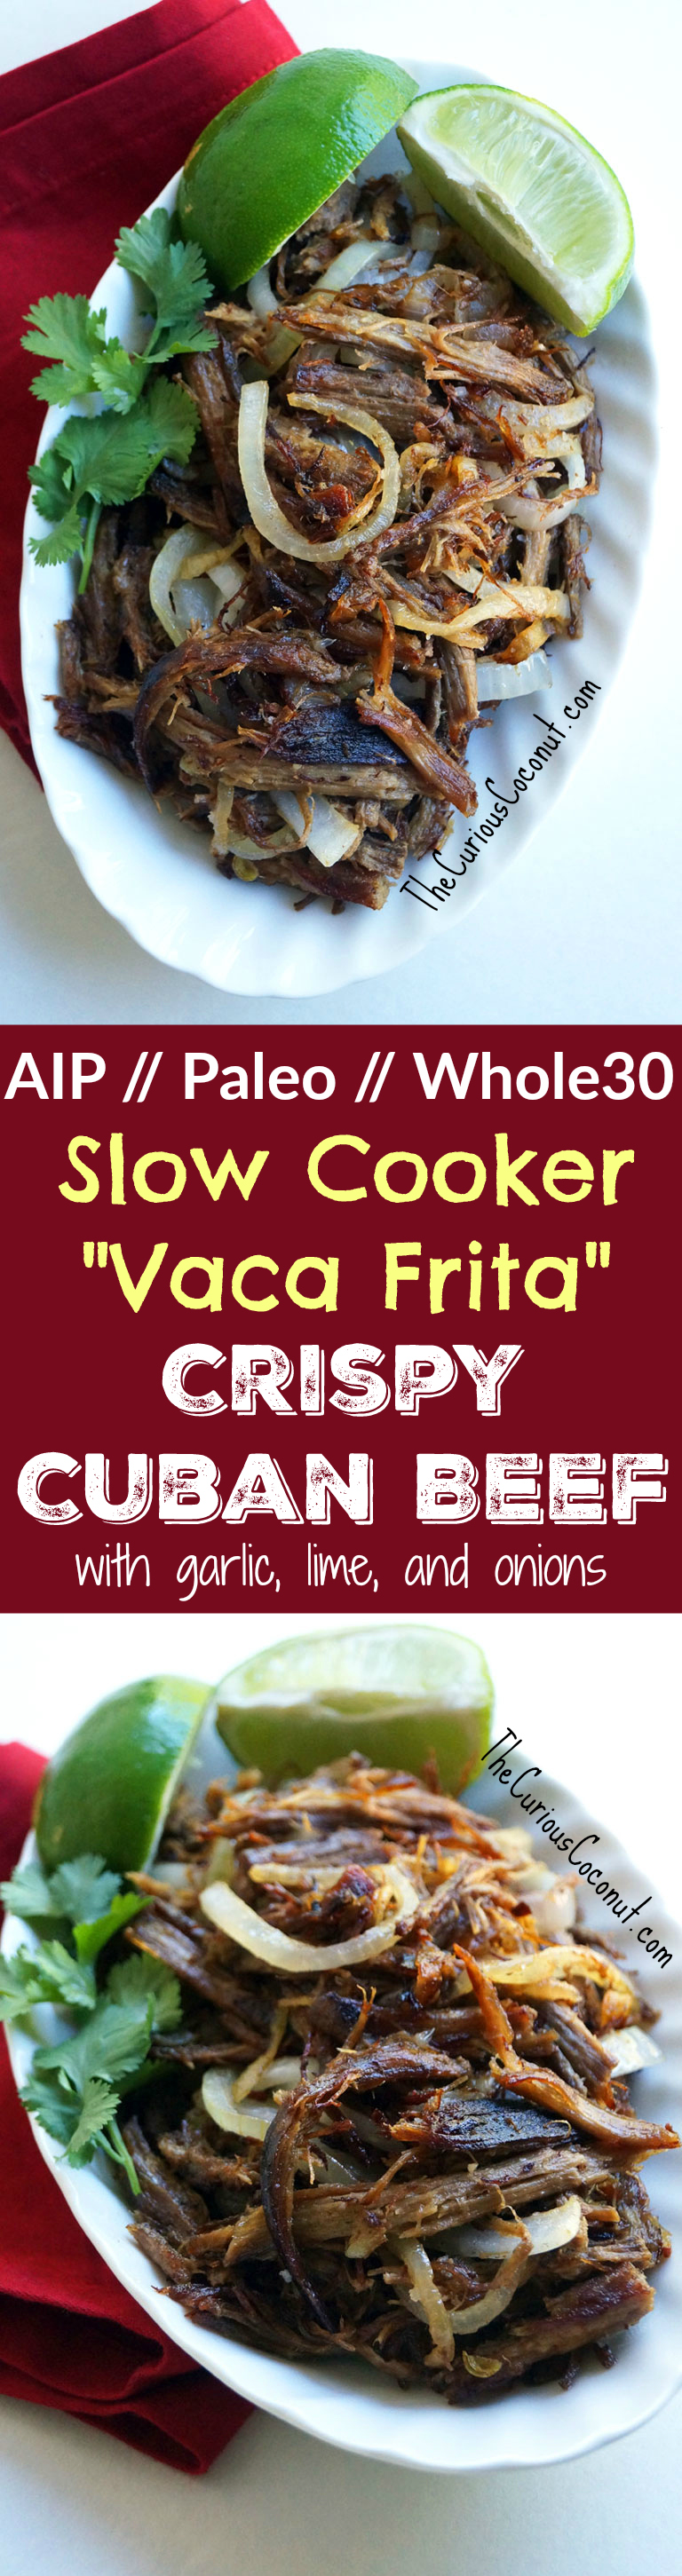 Vaca Frita is a traditional Cuban dish of crispy fried beef with garlic, lime, and onions. Pair it with tostones, maduros, or yuca con mojo for a festive Cuban #Paleo dinner at home! // TheCuriousCoconut.com